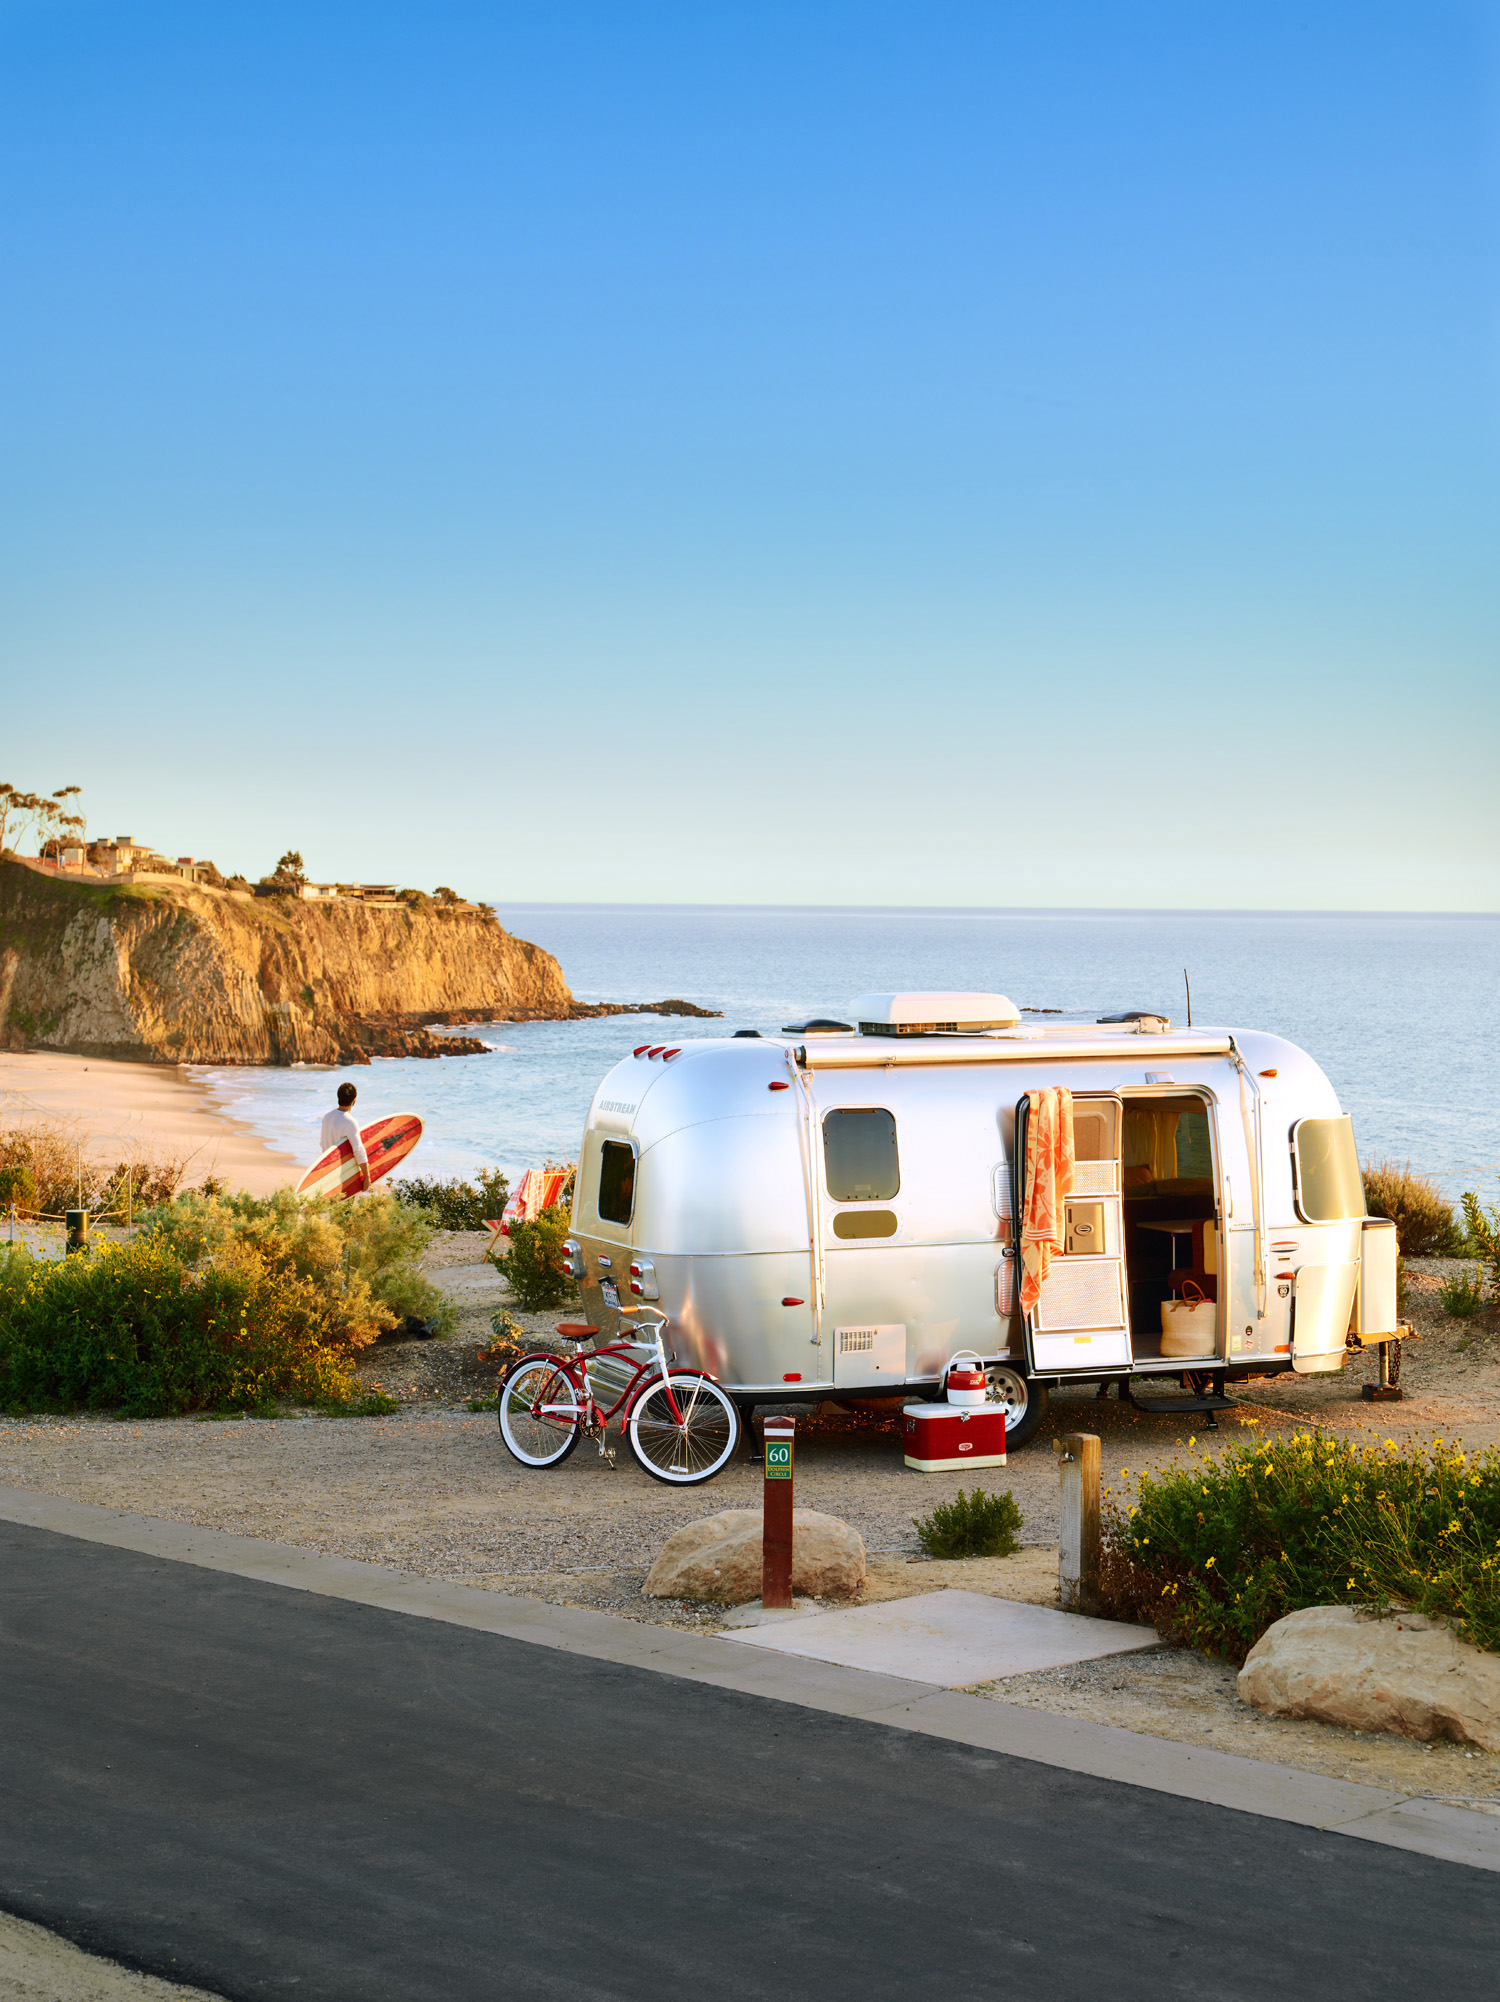 California, Hawaii & Mexico: 55 Best Campgrounds